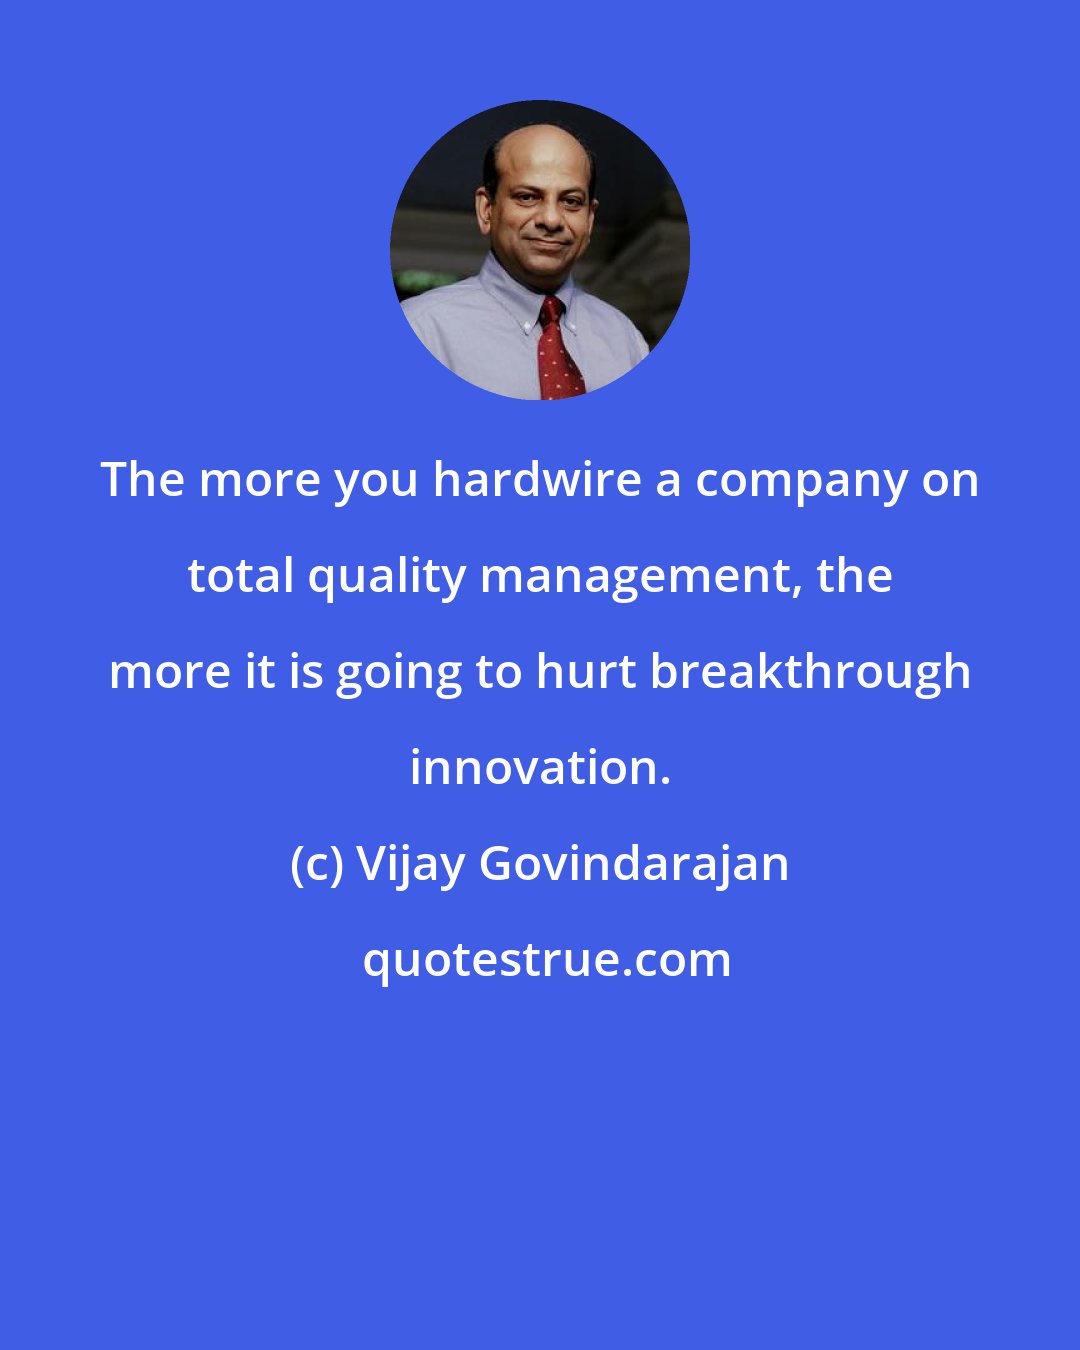 Vijay Govindarajan: The more you hardwire a company on total quality management, the more it is going to hurt breakthrough innovation.